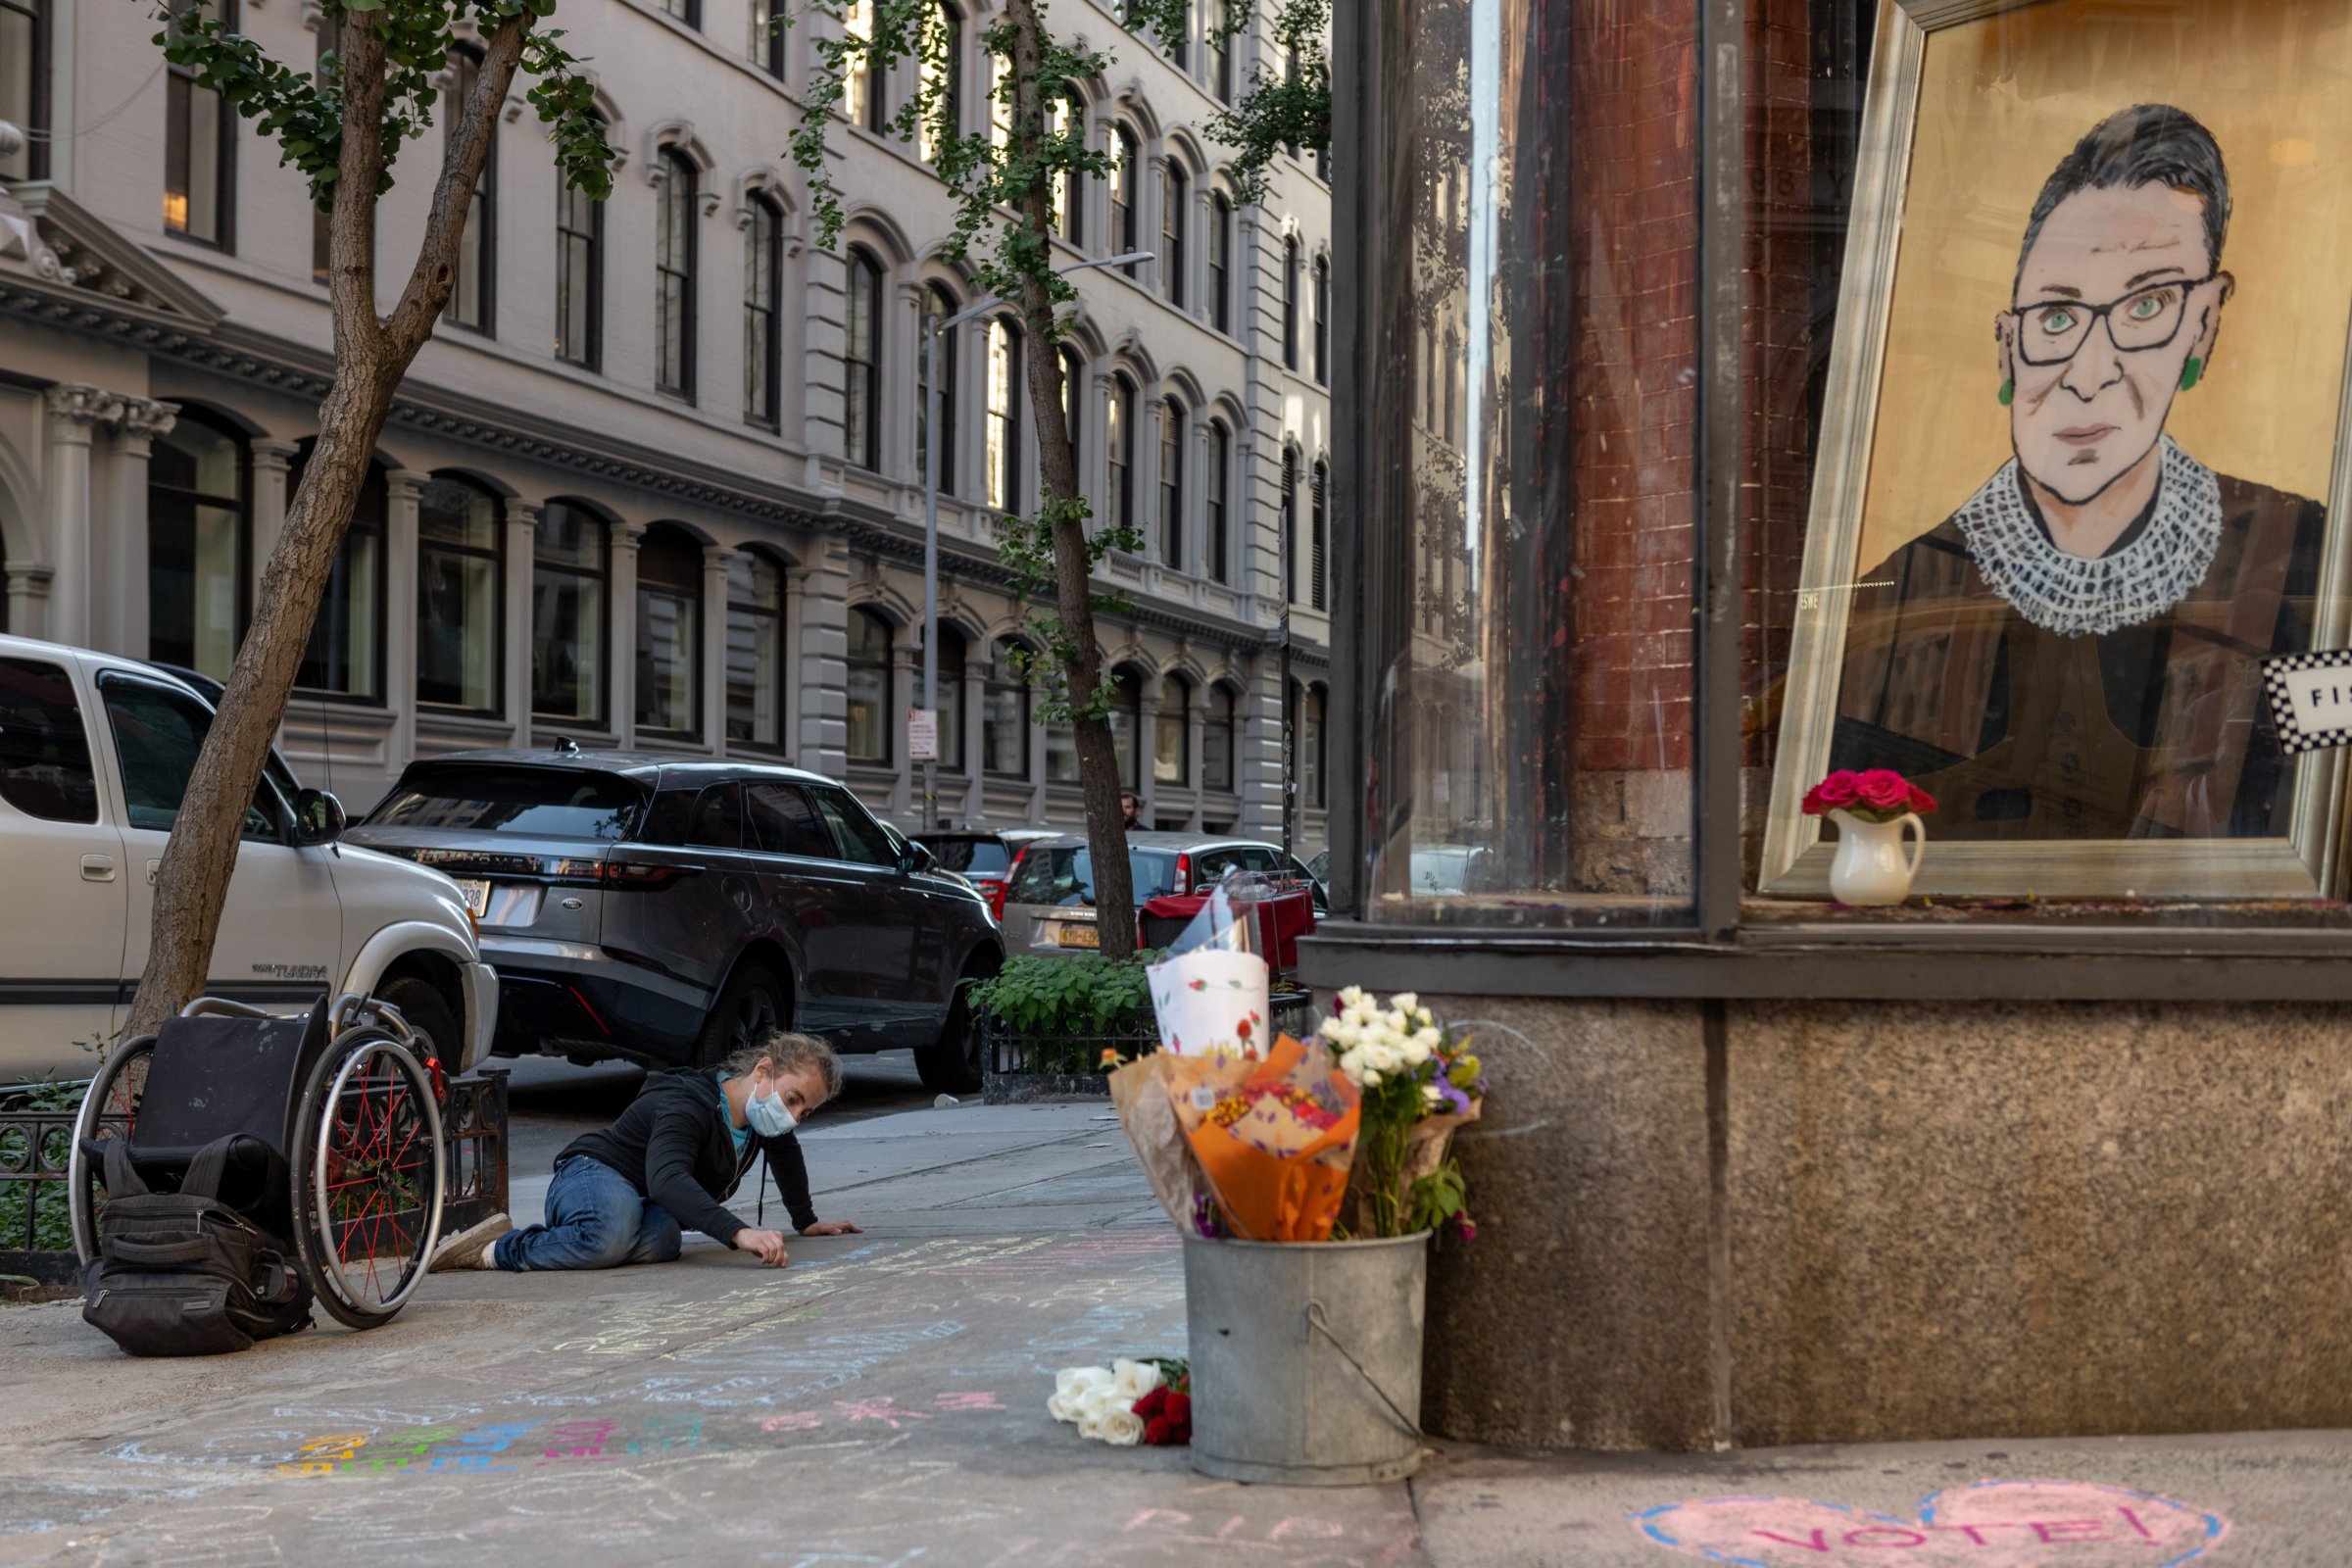 A woman wearing a mask writes a message in chalk in front of a painting of the late Associate Justice of the Supreme Court Ruth Bader Ginsburg on Sept. 19 in New York City. Ginsburg died on Sept. 18.